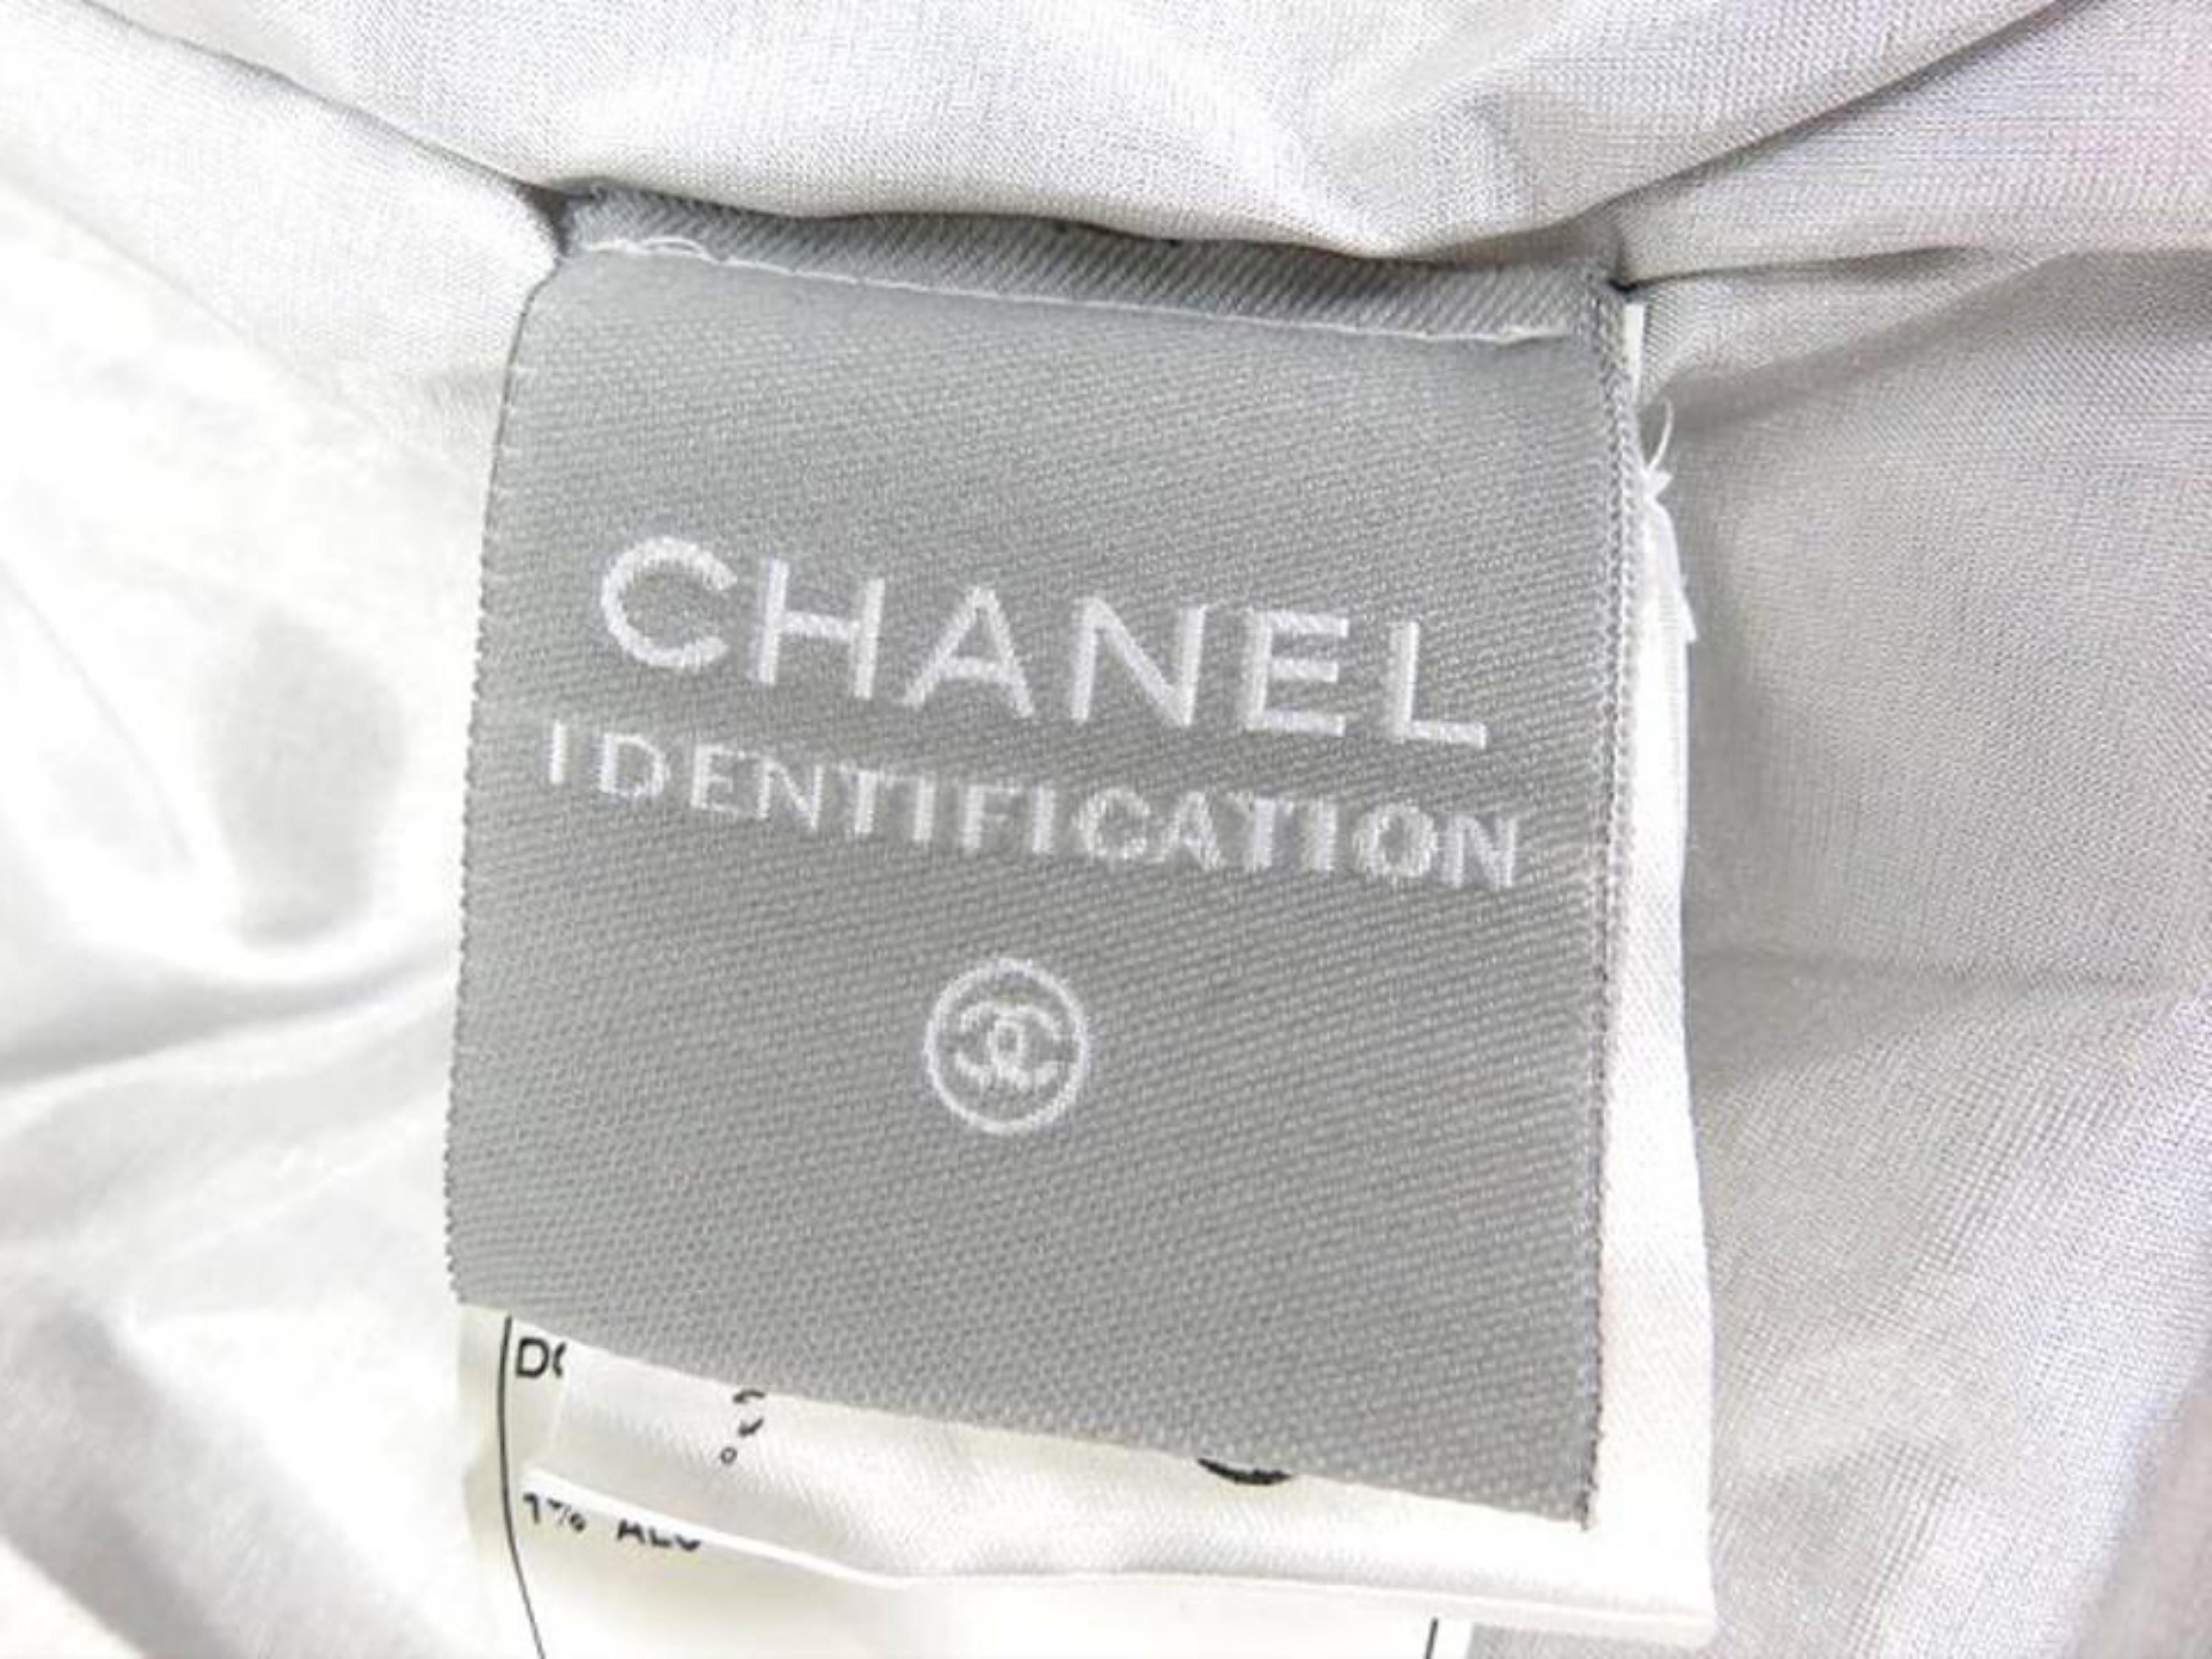 Chanel Black Cc Ski Suit 208823 Activewear In Fair Condition For Sale In Forest Hills, NY